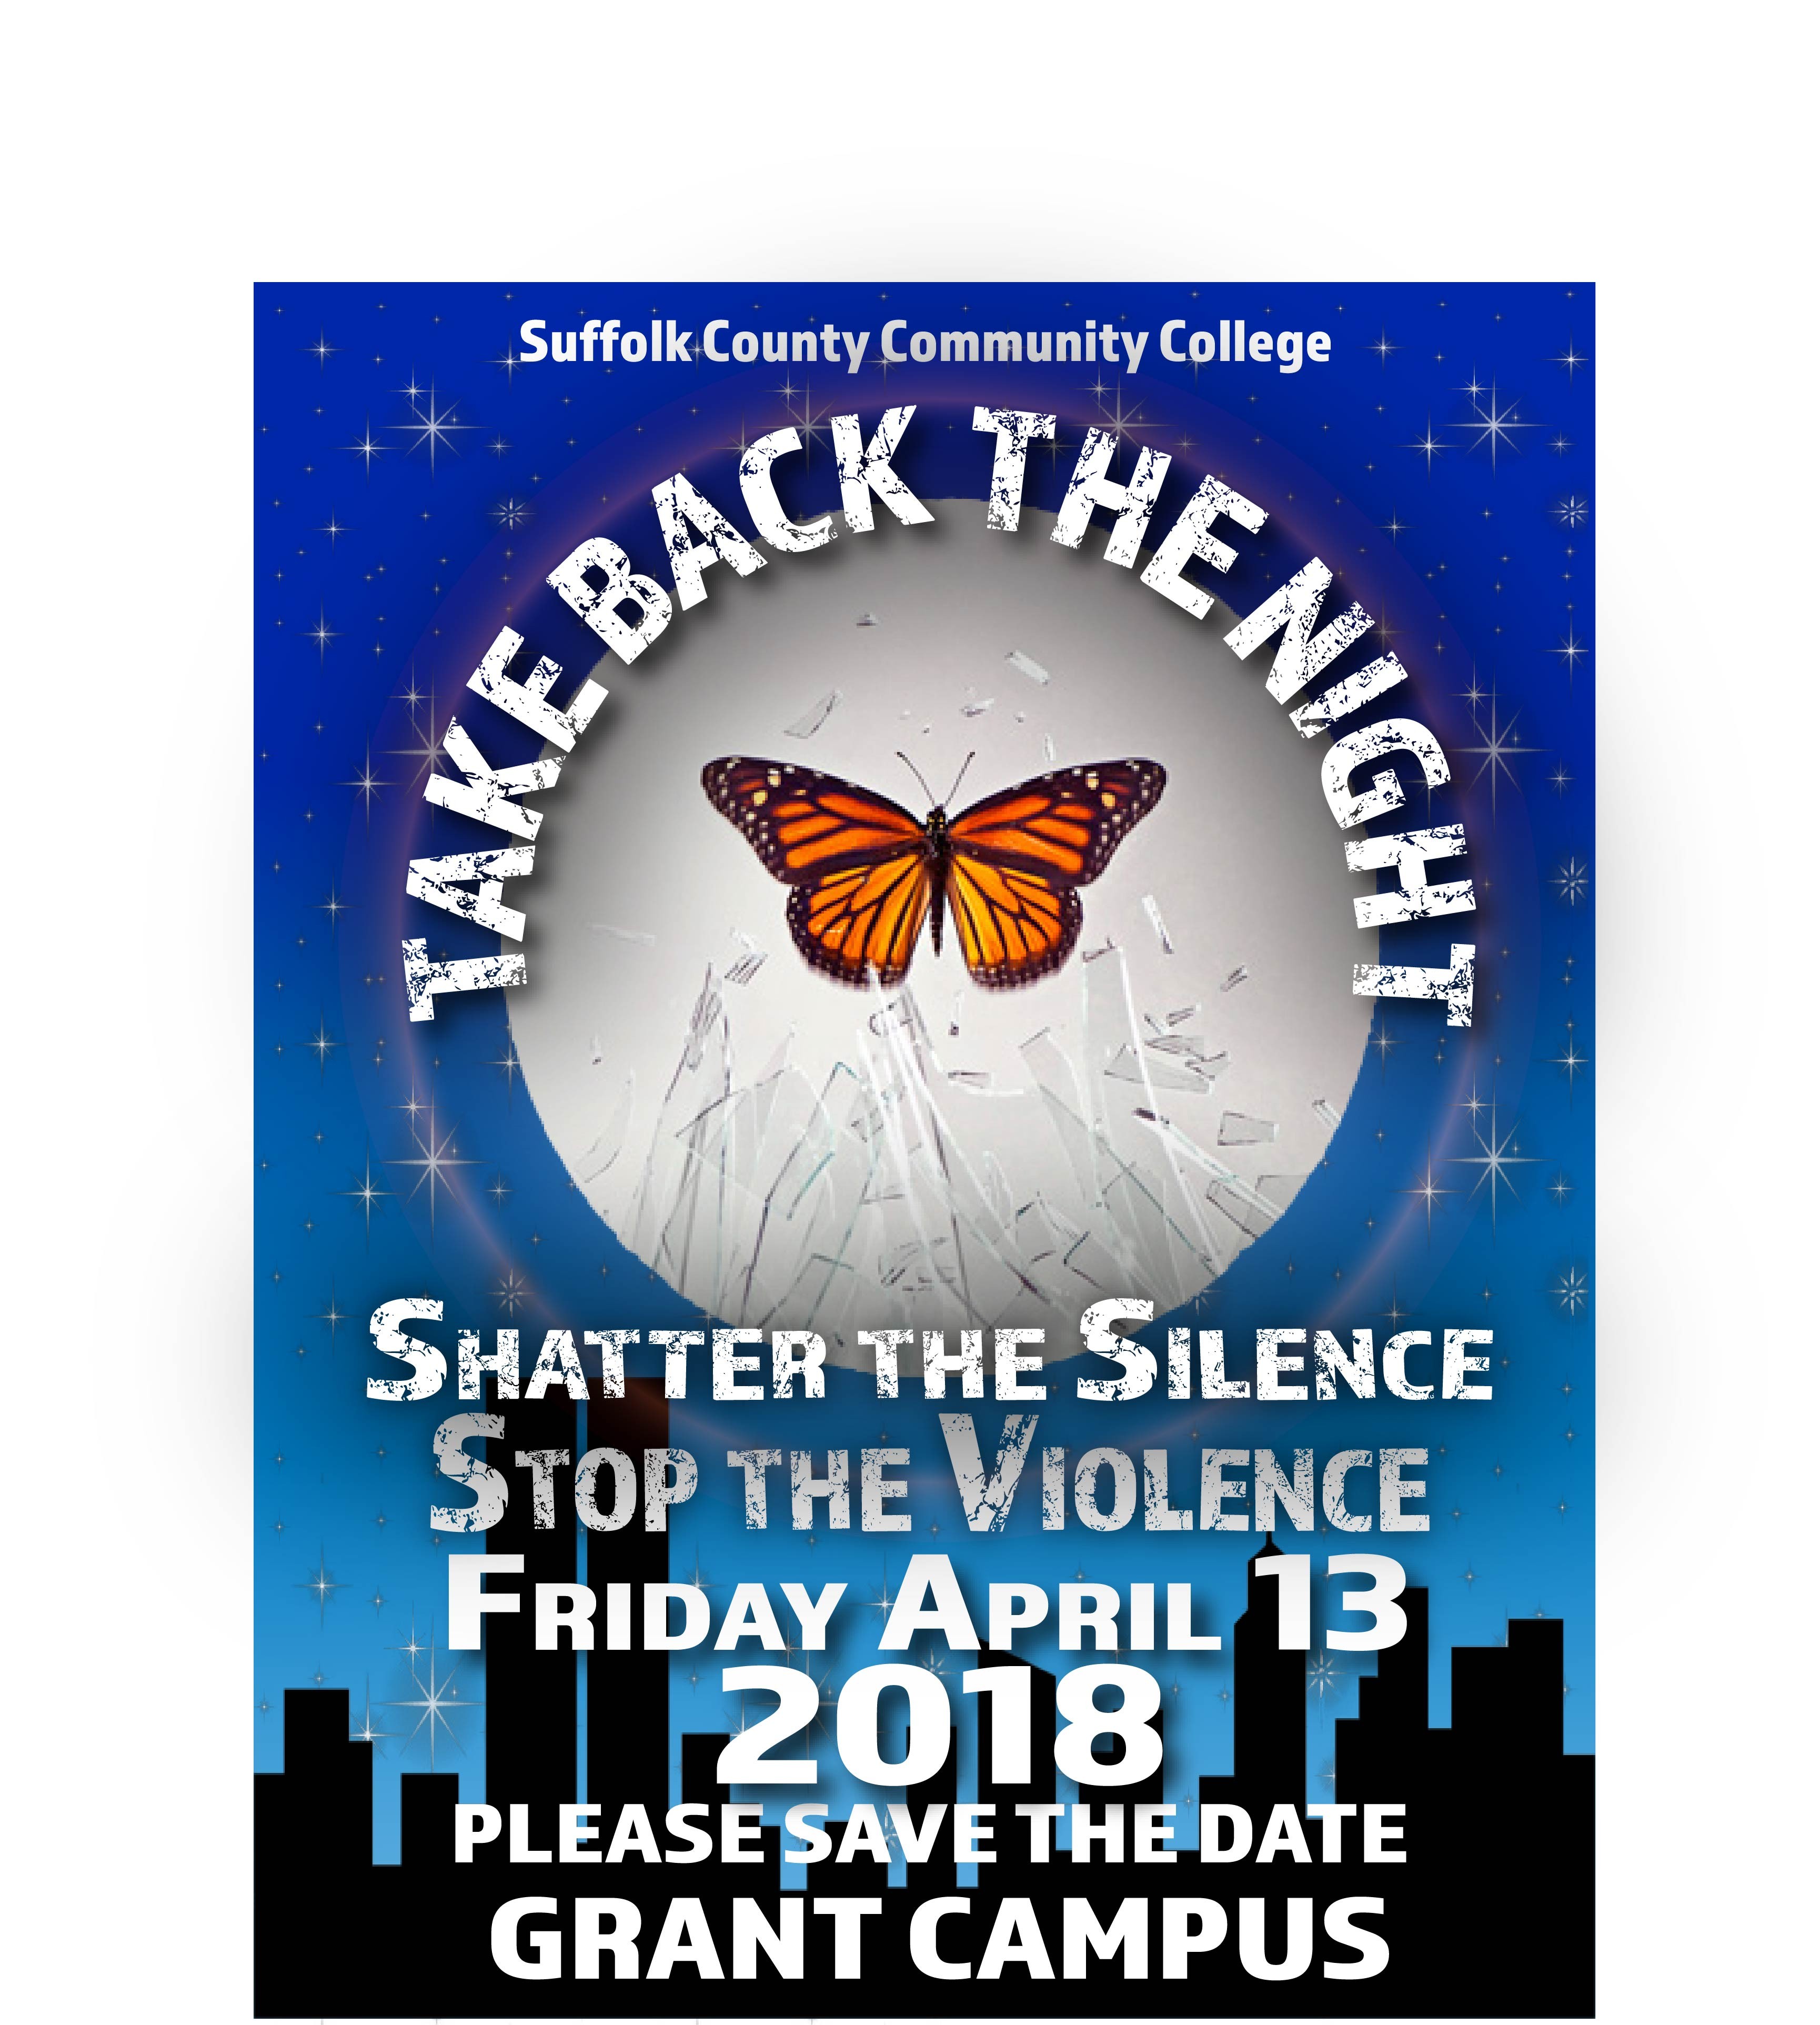 Take Back the Night - Save the Date Announcement for April 13, 2018